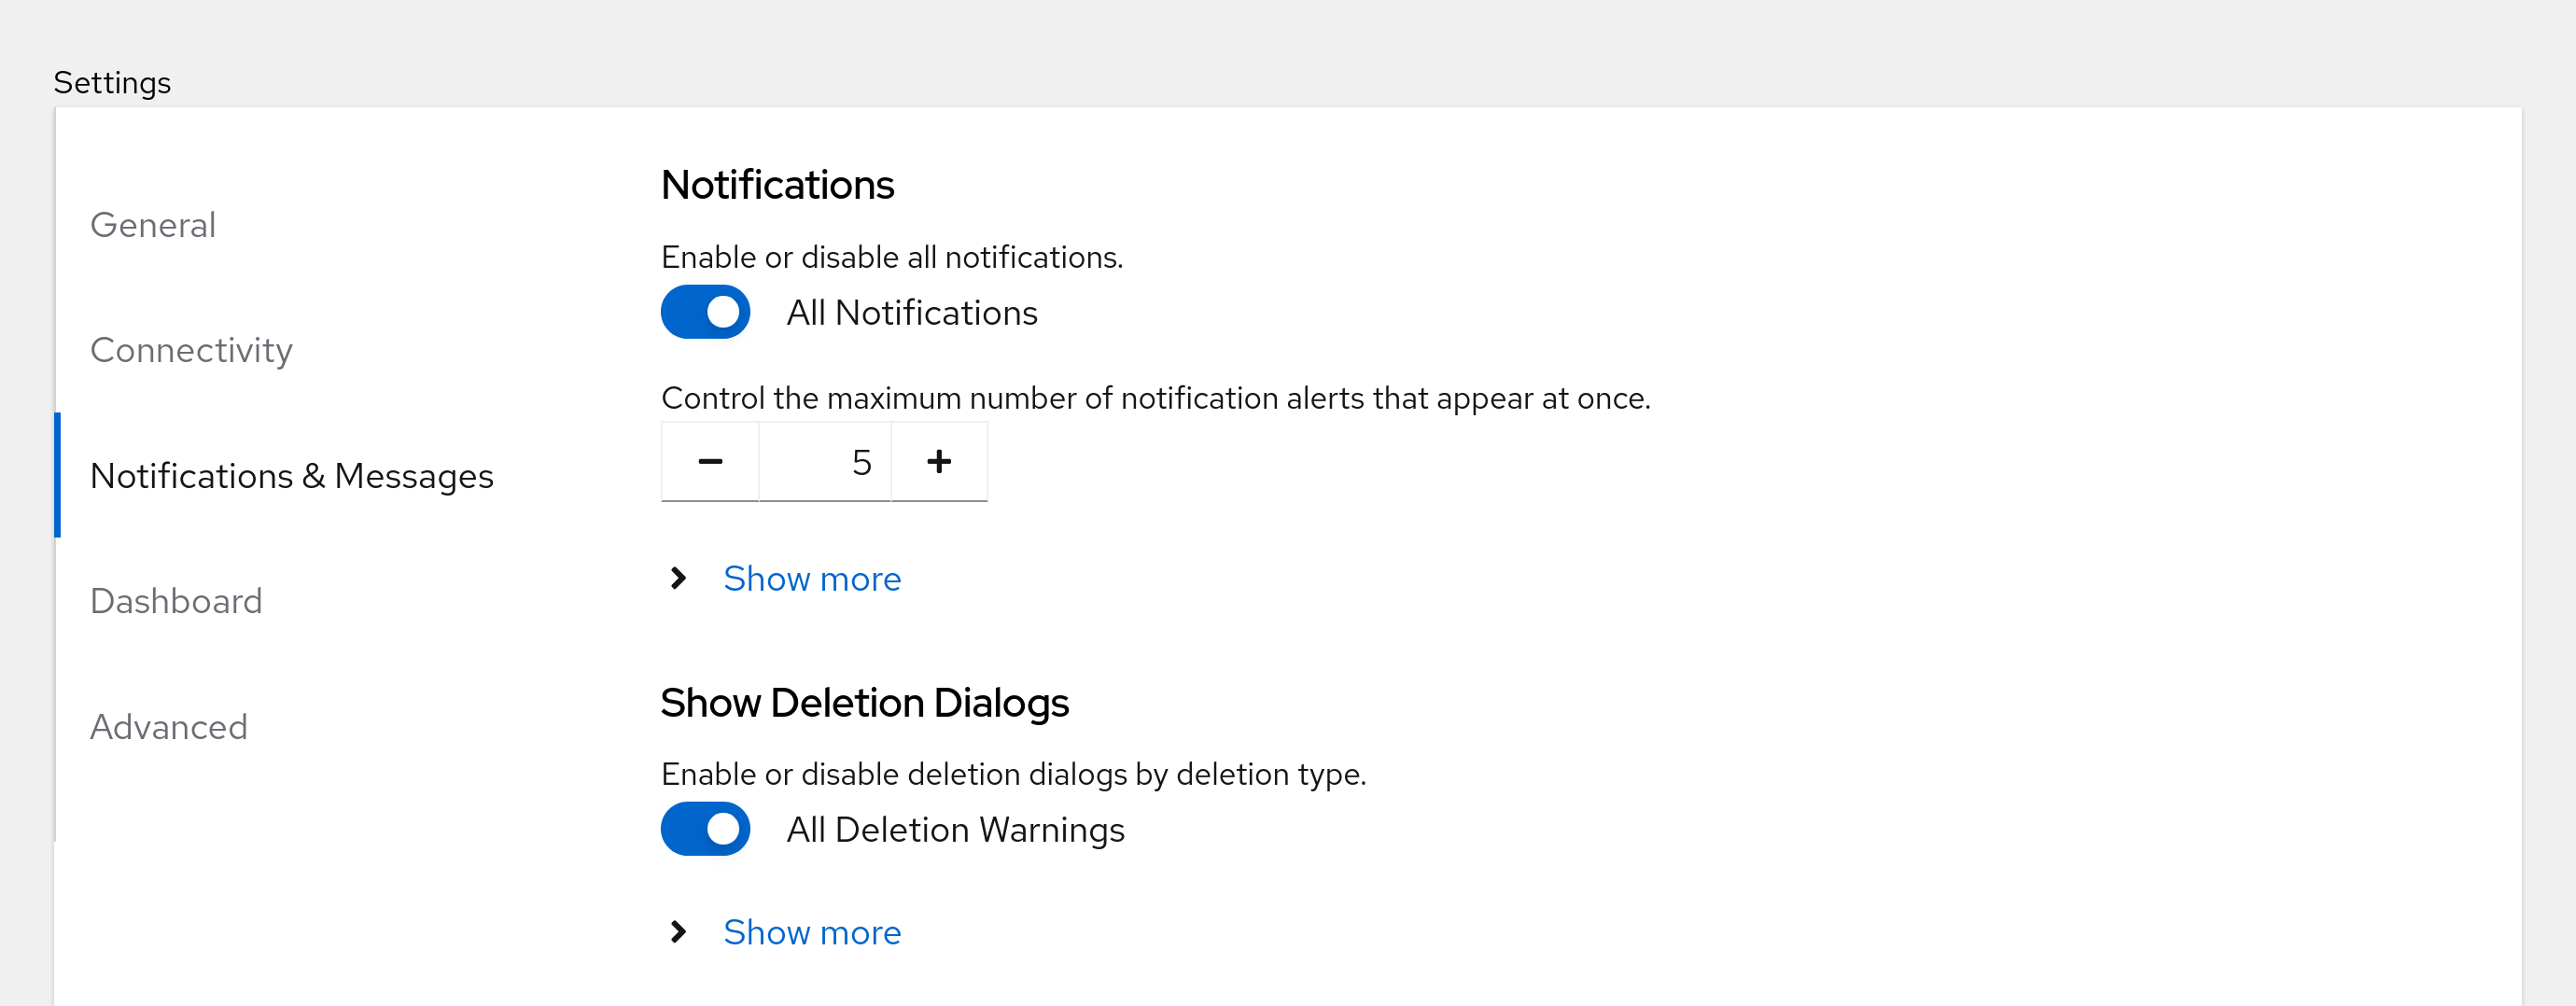 Notifications & Messages settings tab